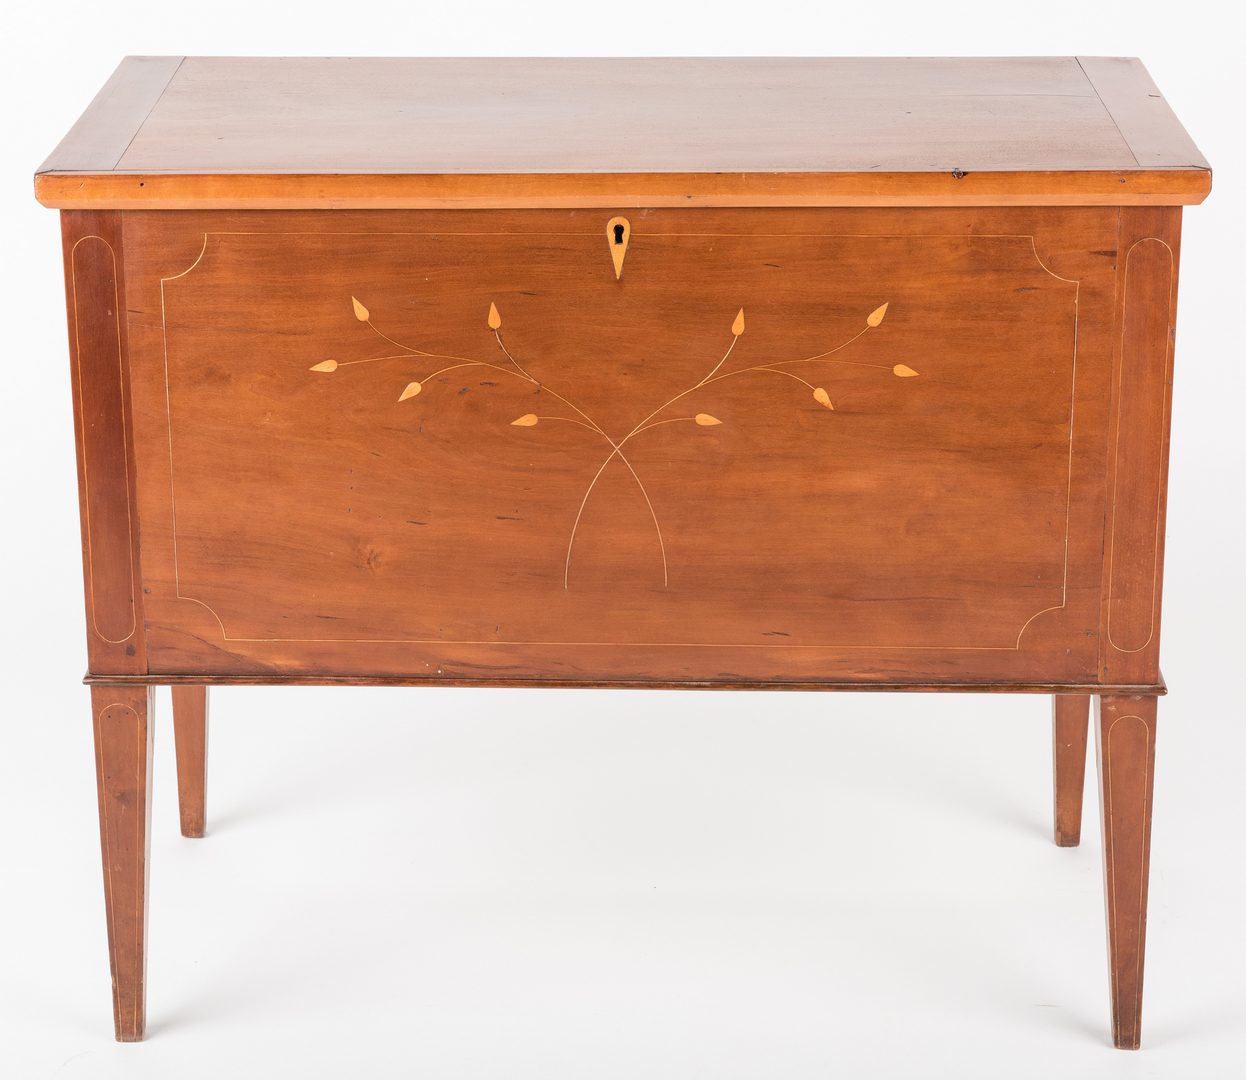 Lot 151: KY Inlaid Cherry Sugar chest